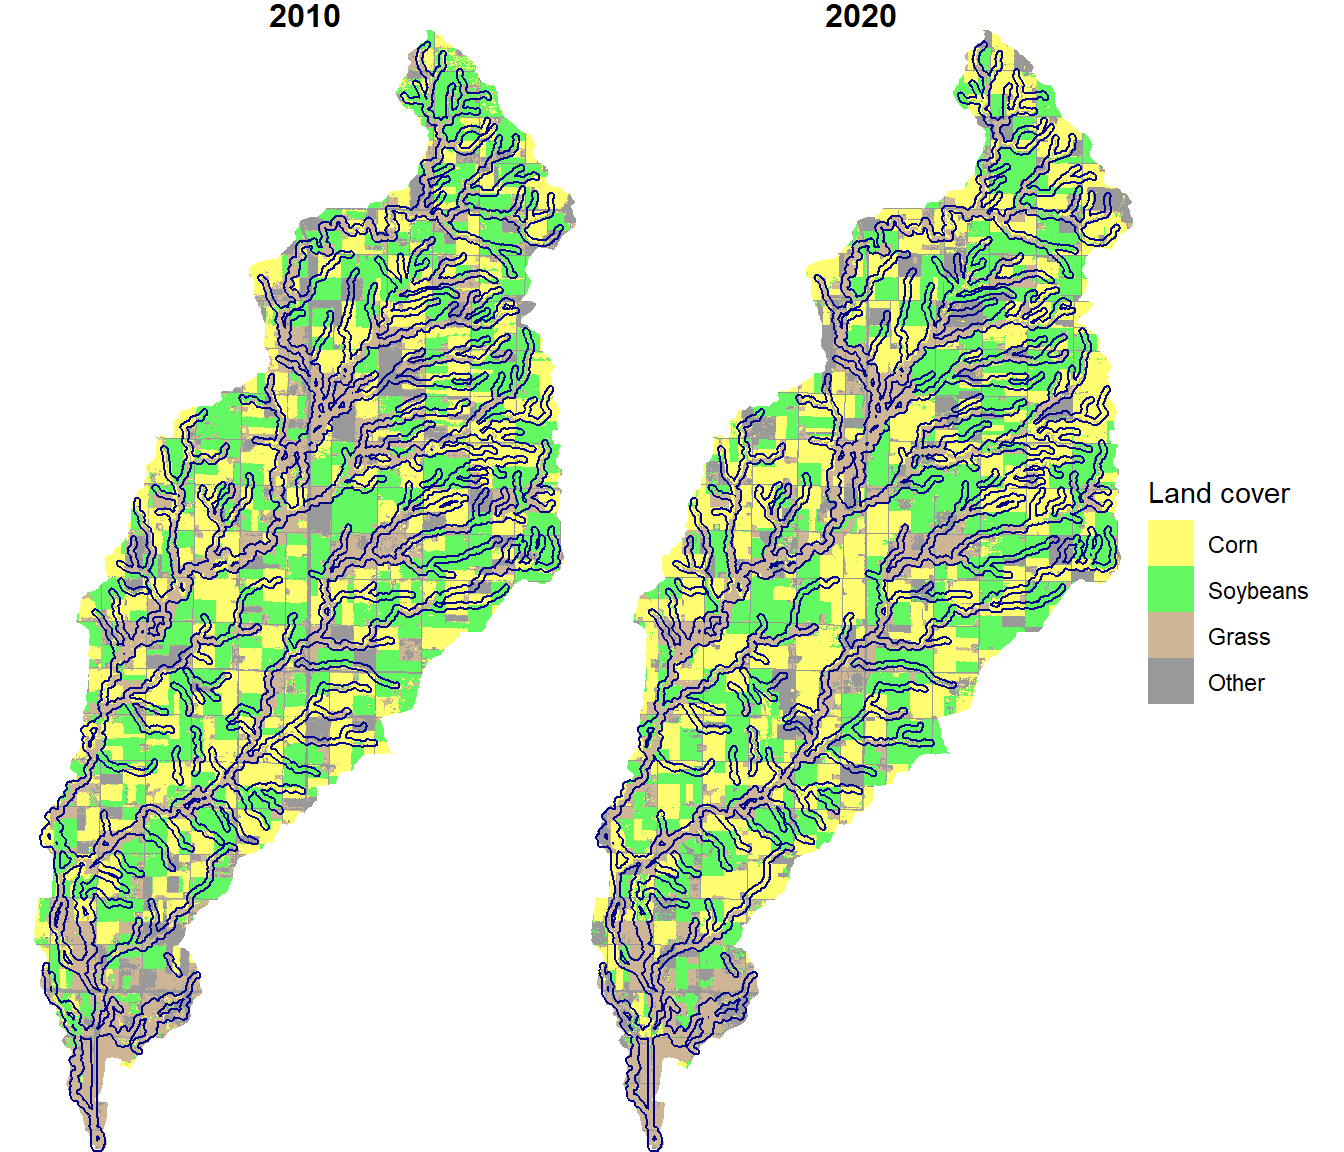 Stream buffers overlaid on crop types for the North Deer Creek watershed.